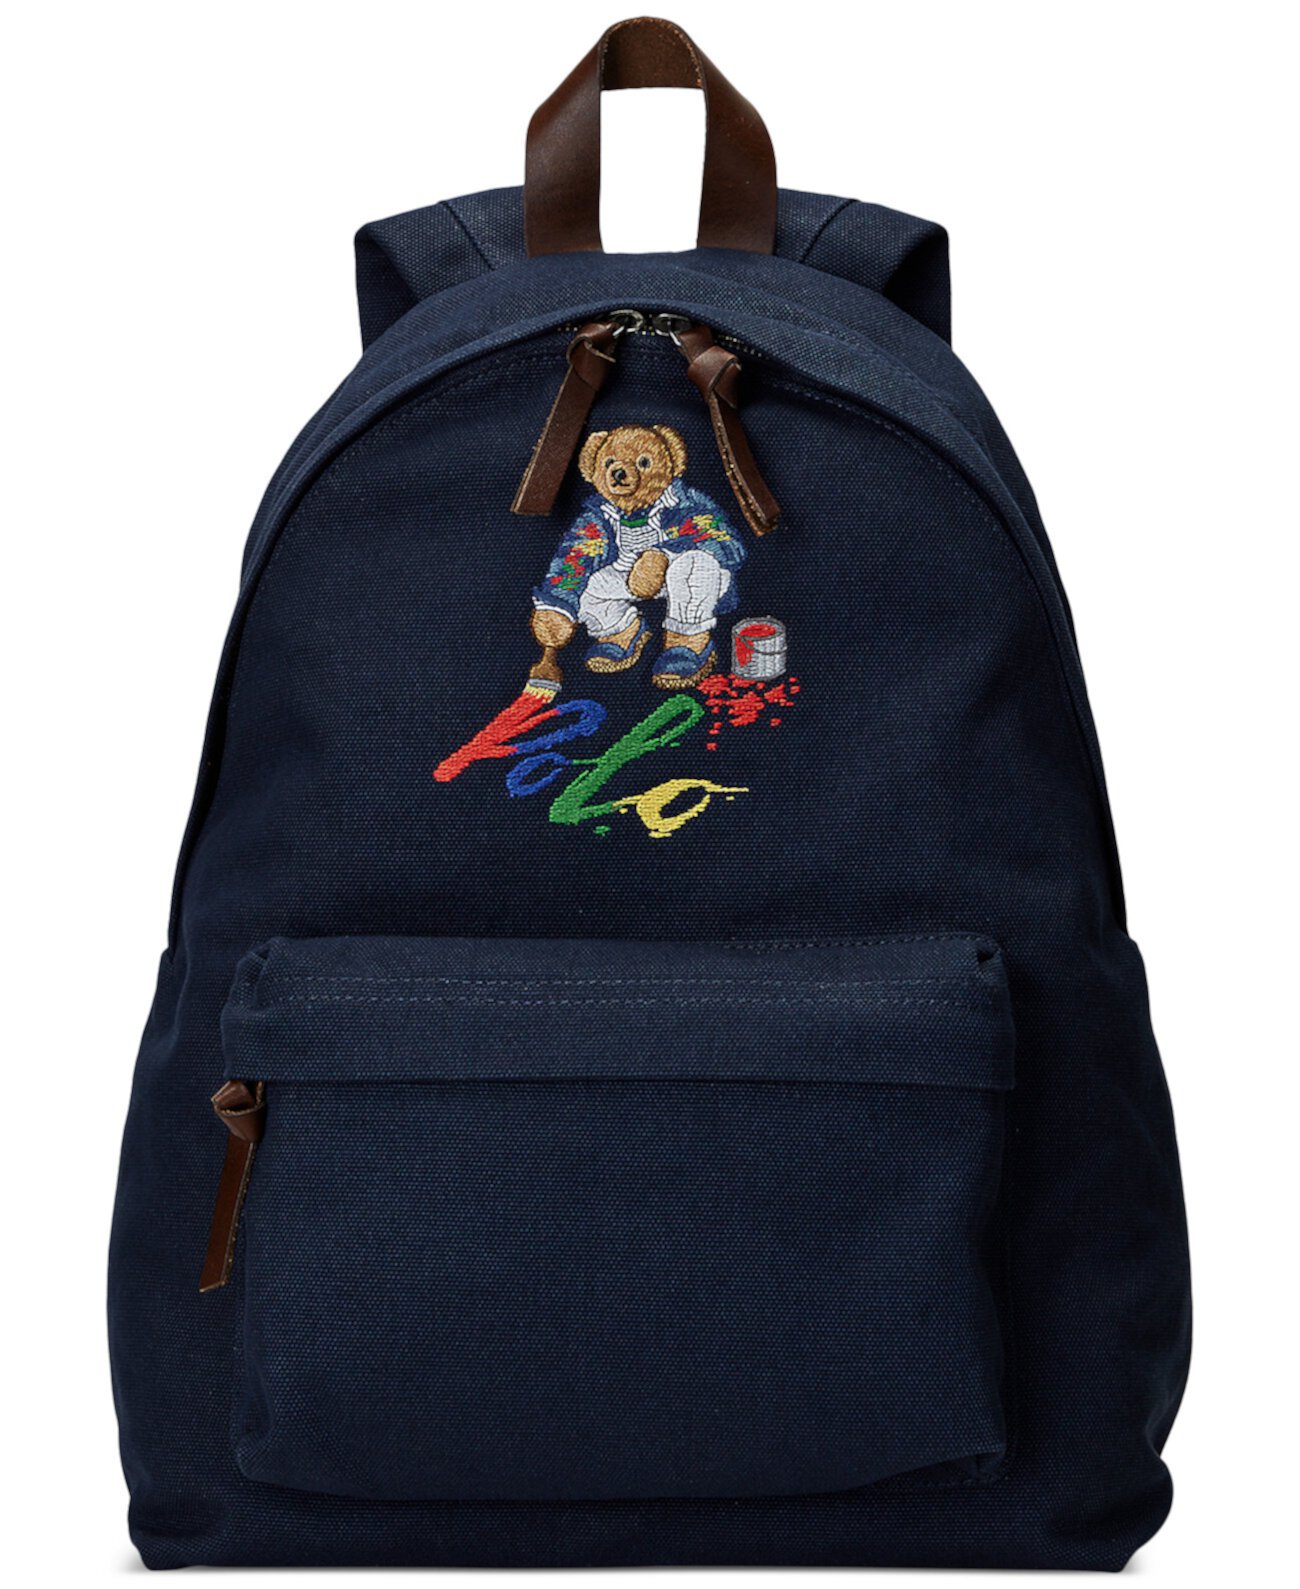 Men's Embroidered Canvas Backpack Polo Ralph Lauren